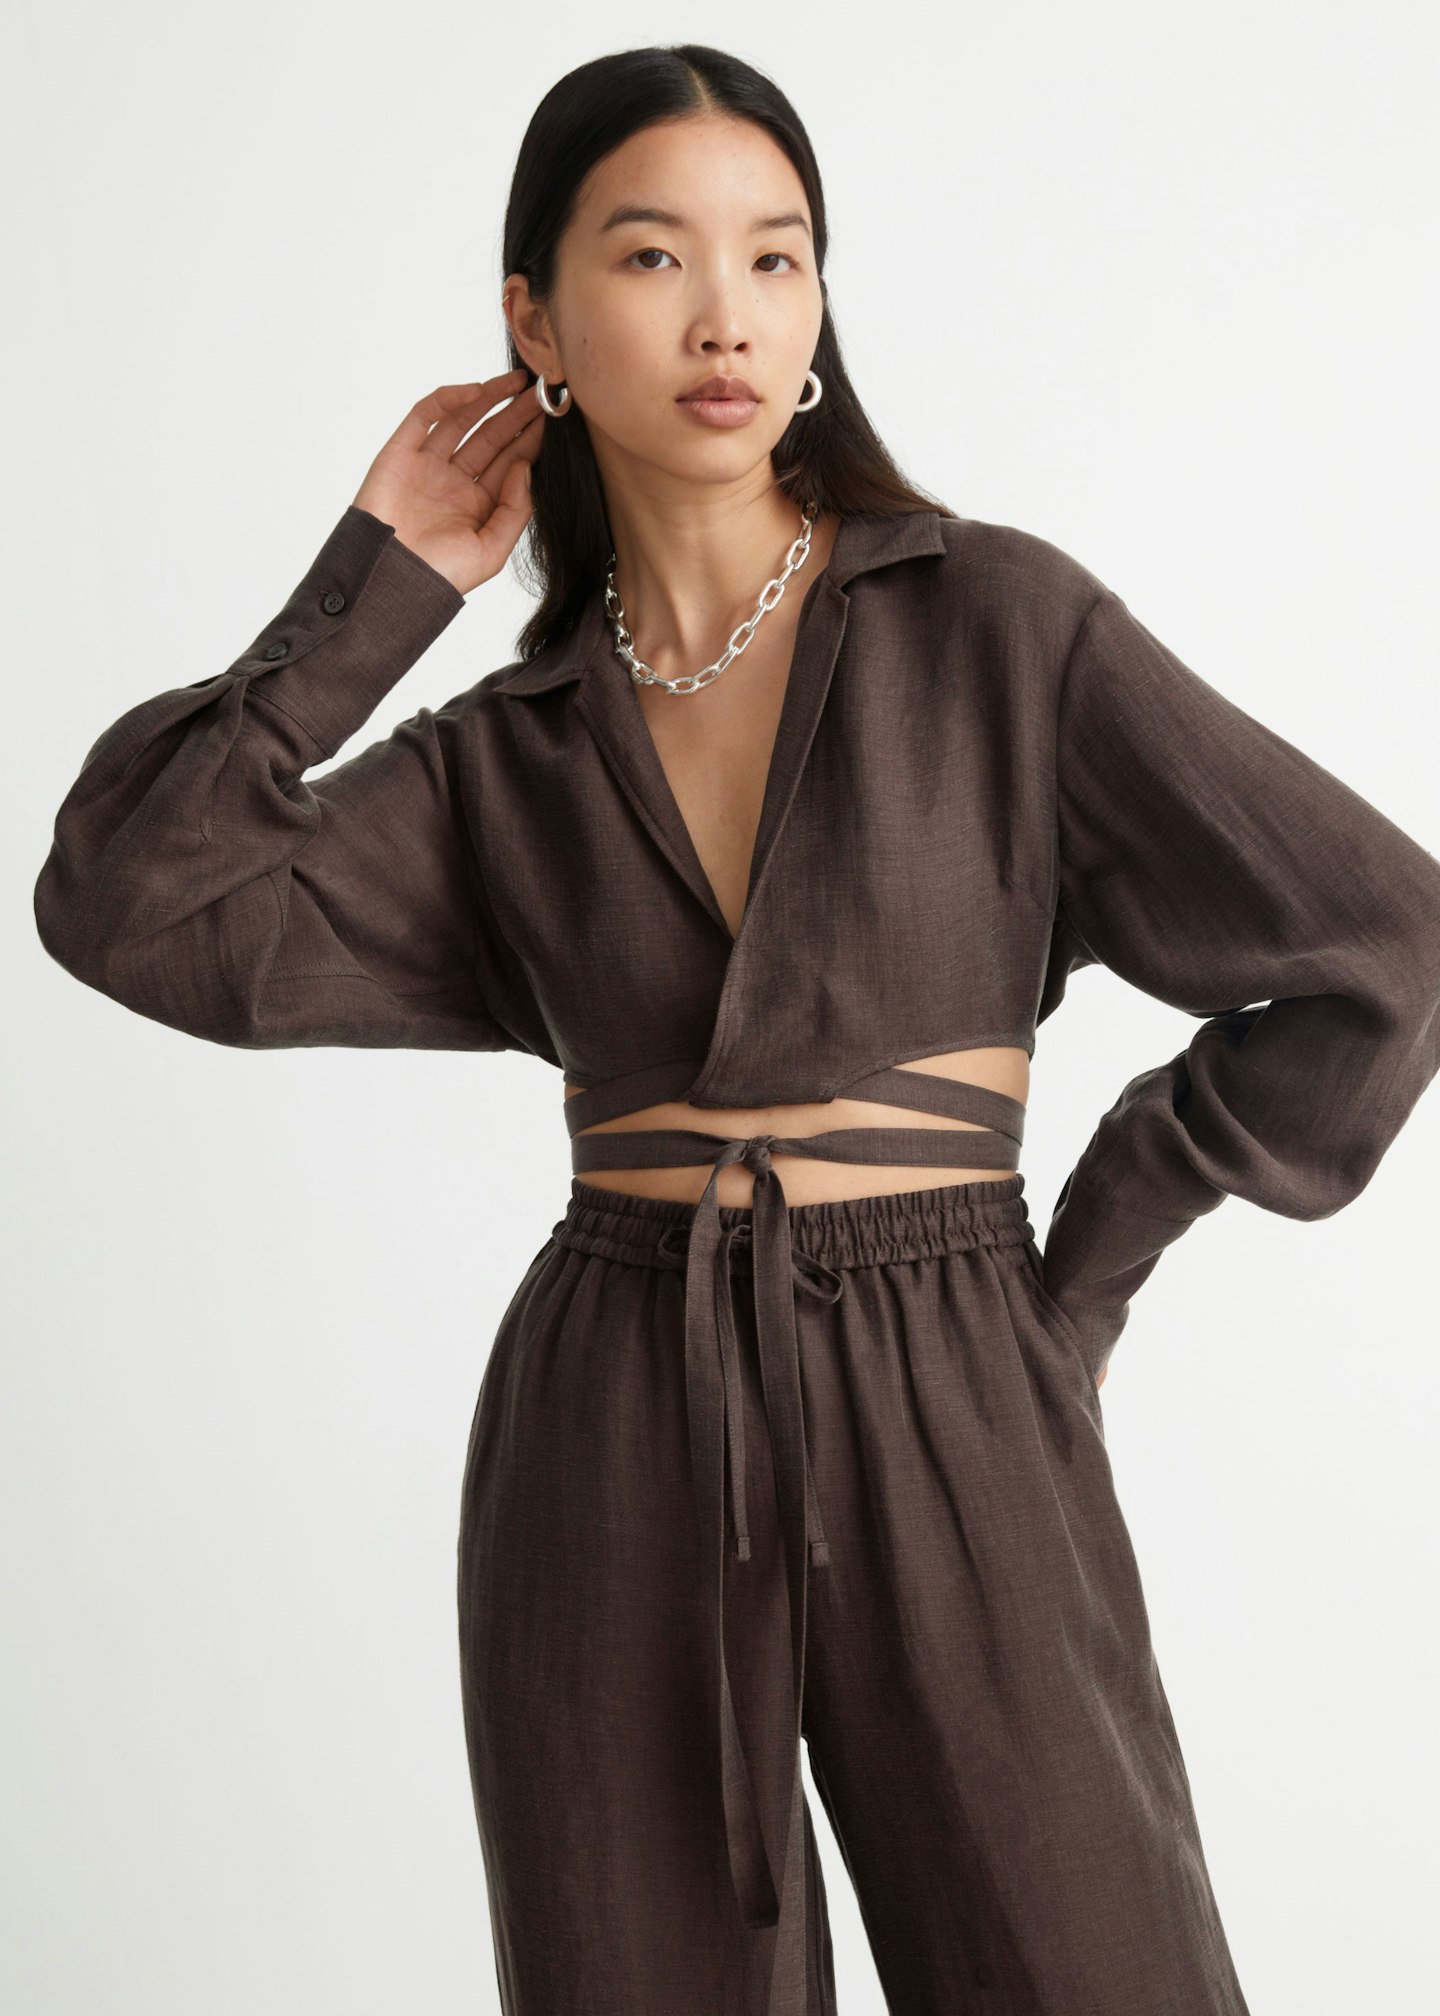 & Other Stories, Cropped Criss-Cross Tie Blouse, £65